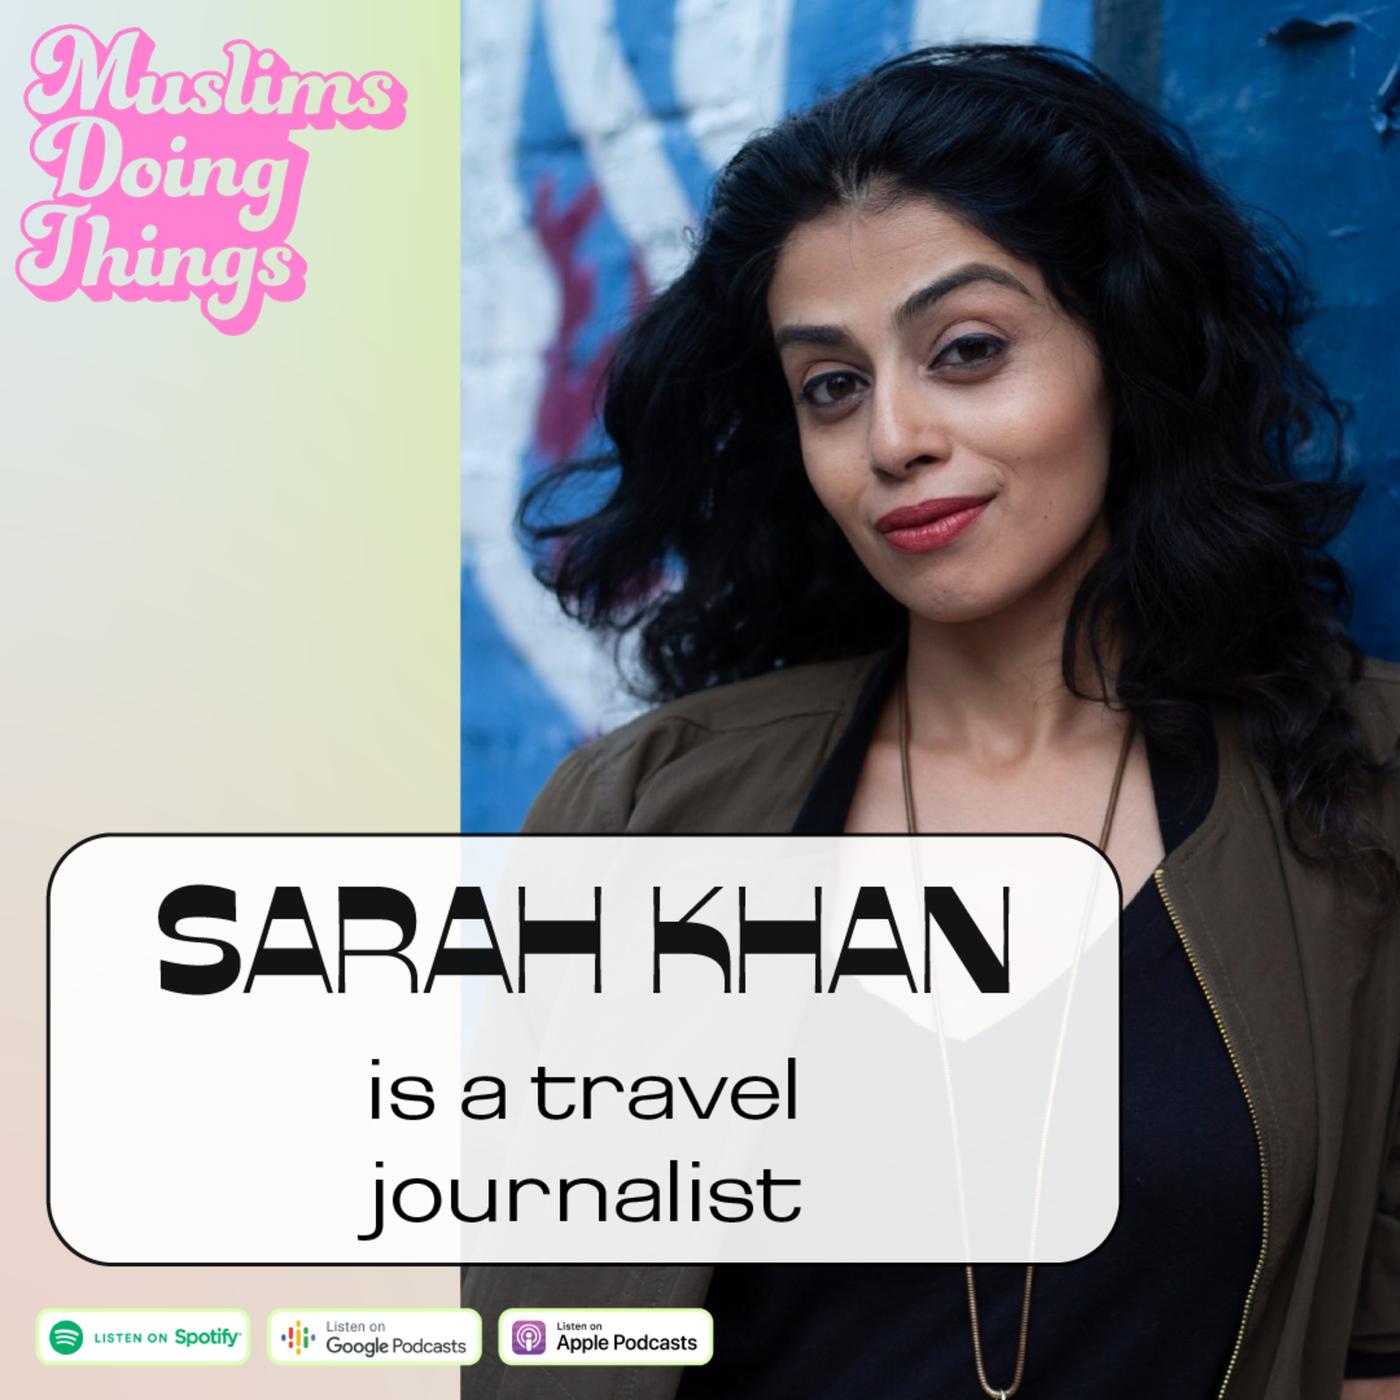 Muslims Doing Things Podcast: Sarah Khan is a Travel Journalist